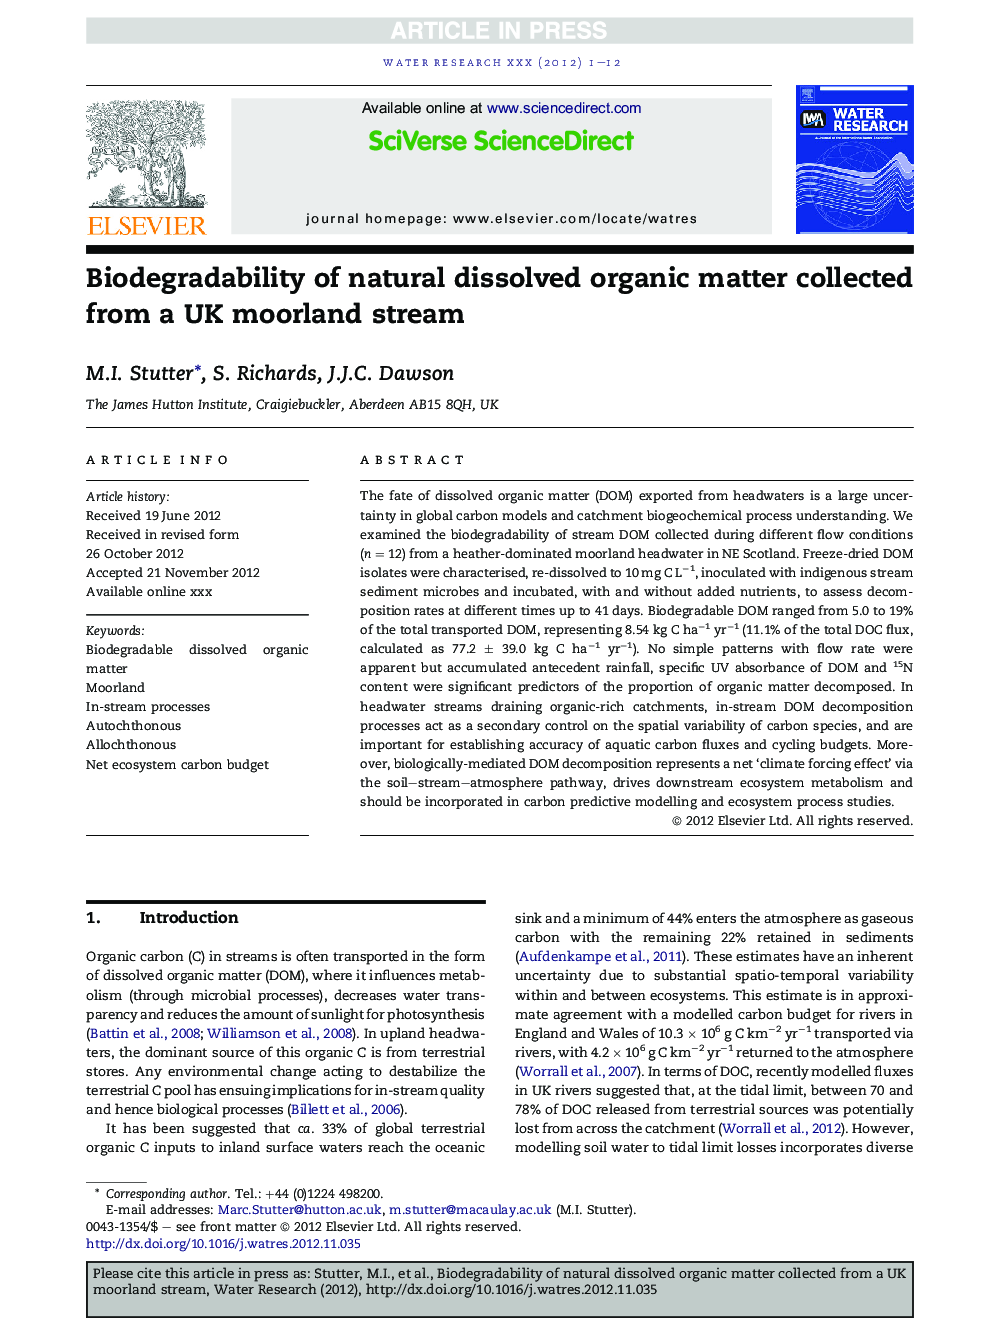 Biodegradability of natural dissolved organic matter collected from a UK moorland stream